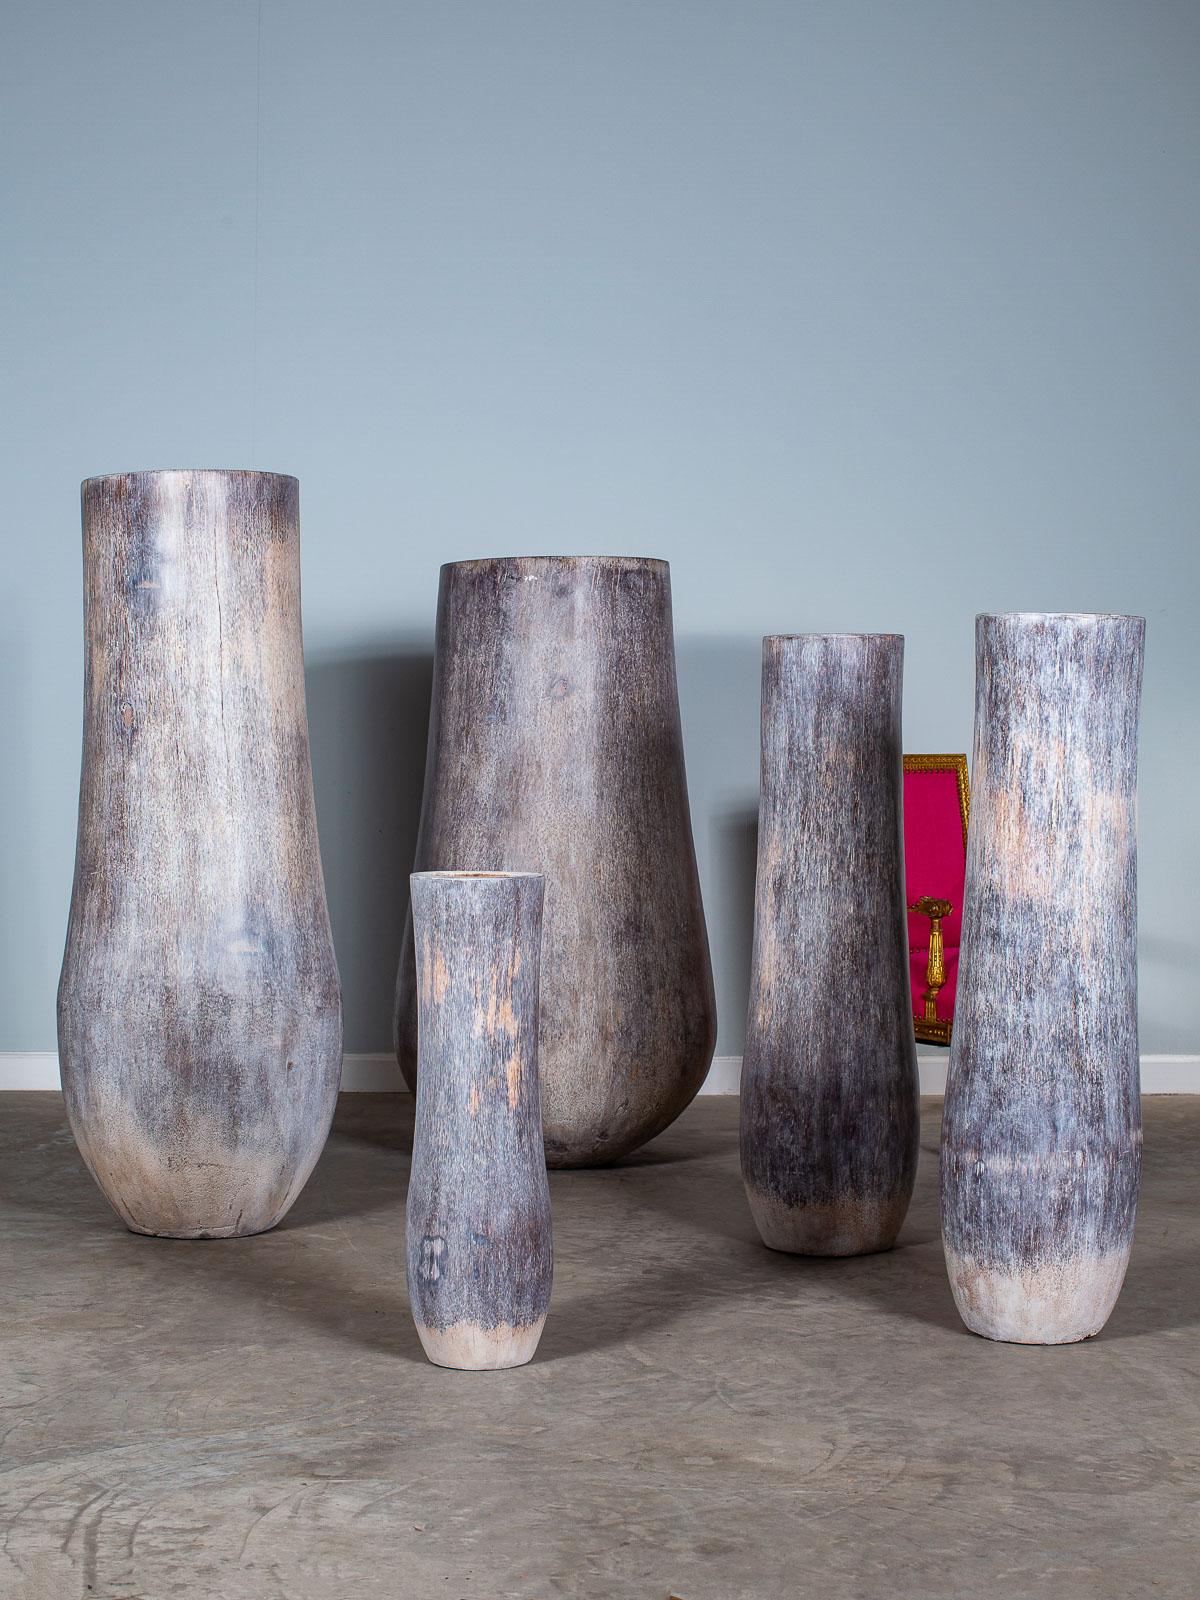 A set of five organic modern palmwood planter pots from Sumatra Indonesia hand rubbed with a grey washed finish. Natural sculptures enhanced by contemporary imagination. Please enlarge all the photographs to see the unique details in closeup. The